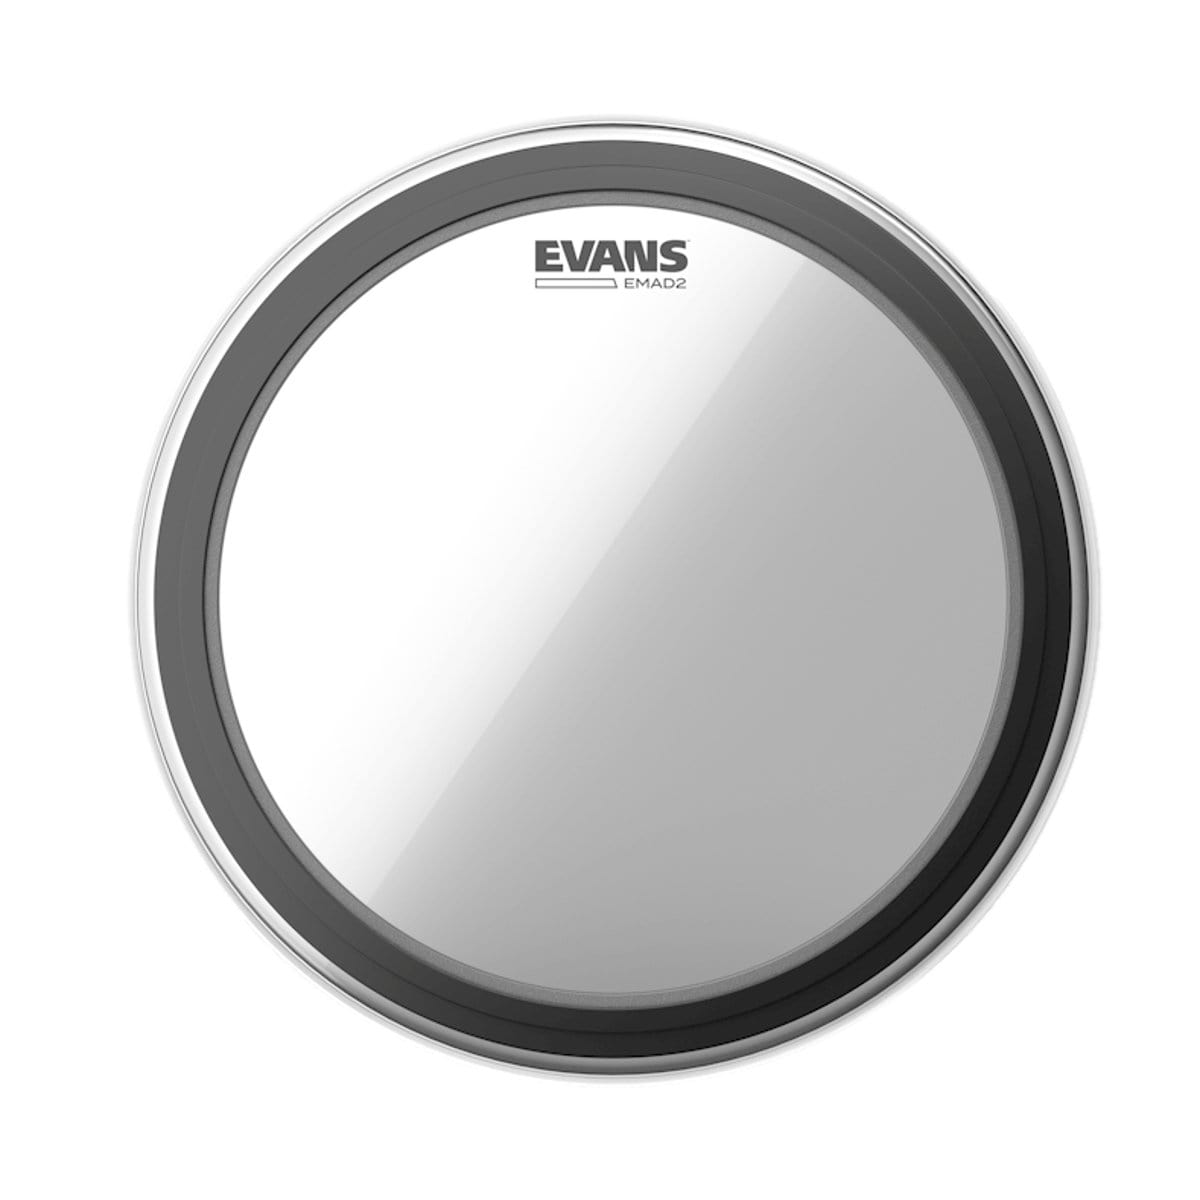 Evans Percussion Evans 22 Inch Bass Drum Head EMAD2 Clear BD22EMAD2 - Byron Music